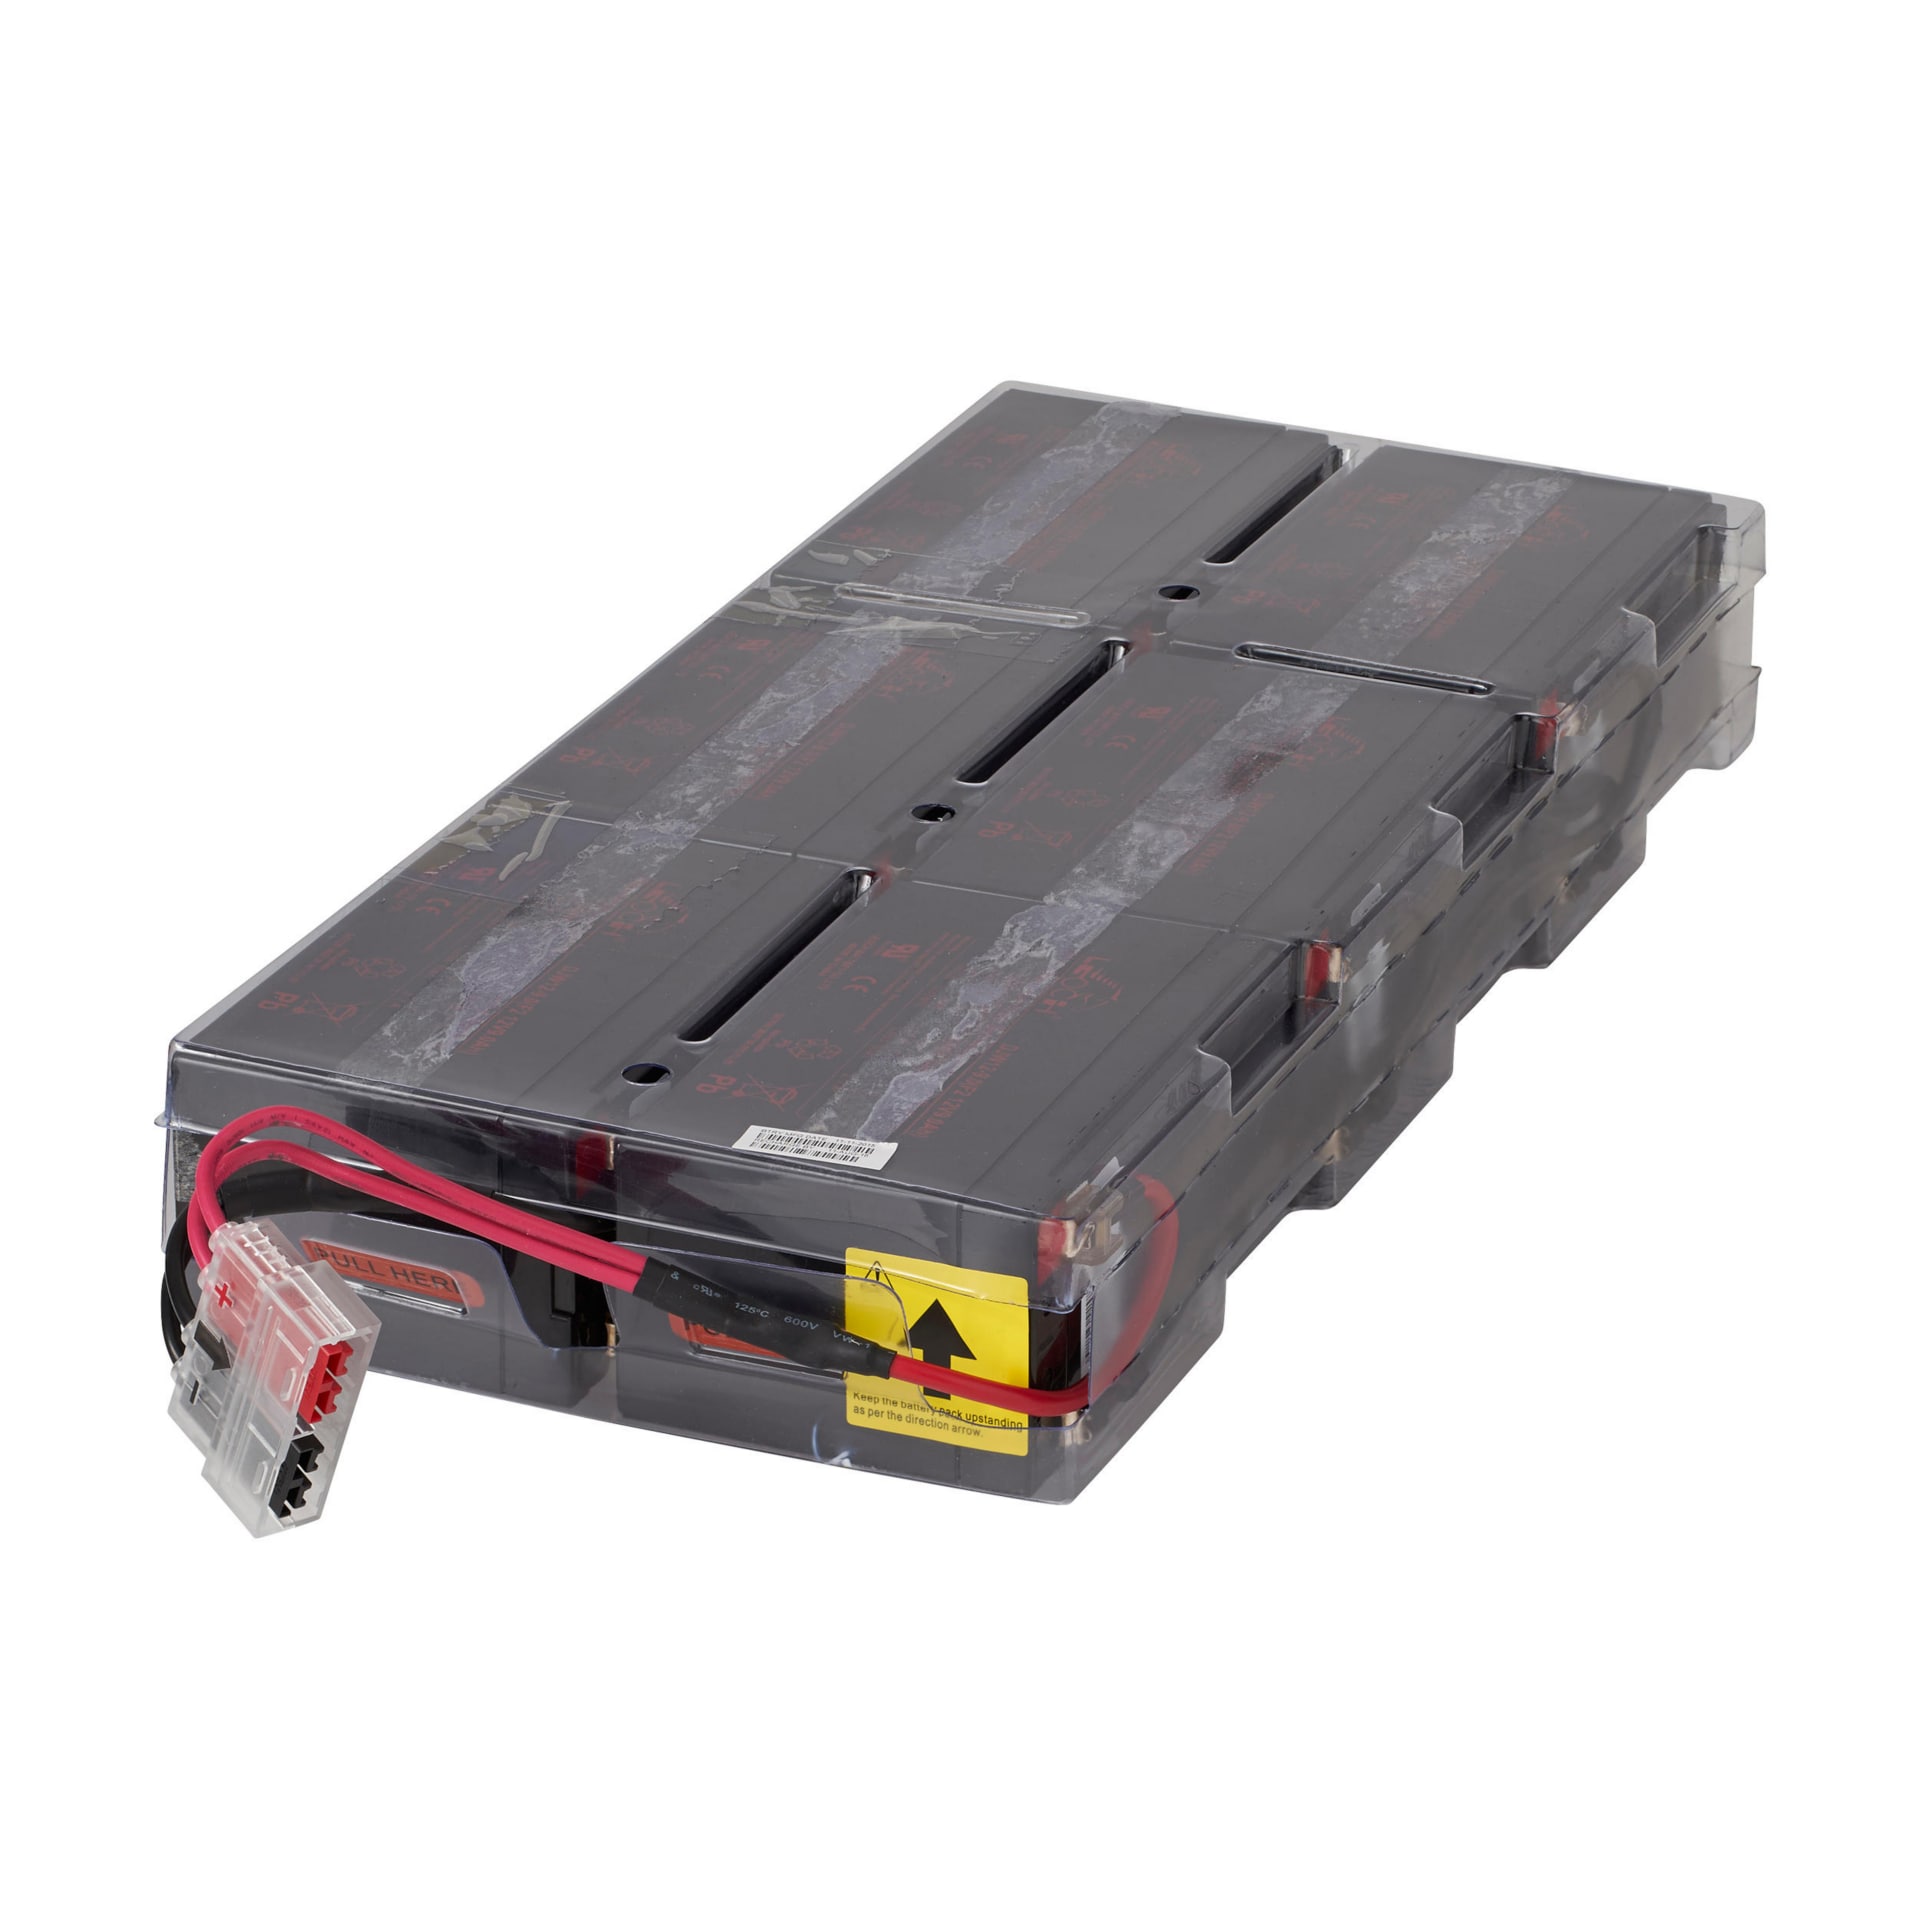 Eaton Internal Replacement Battery Cartridge (RBC) for Select 2kVA to 2.2kVA UPS Systems and EBMs